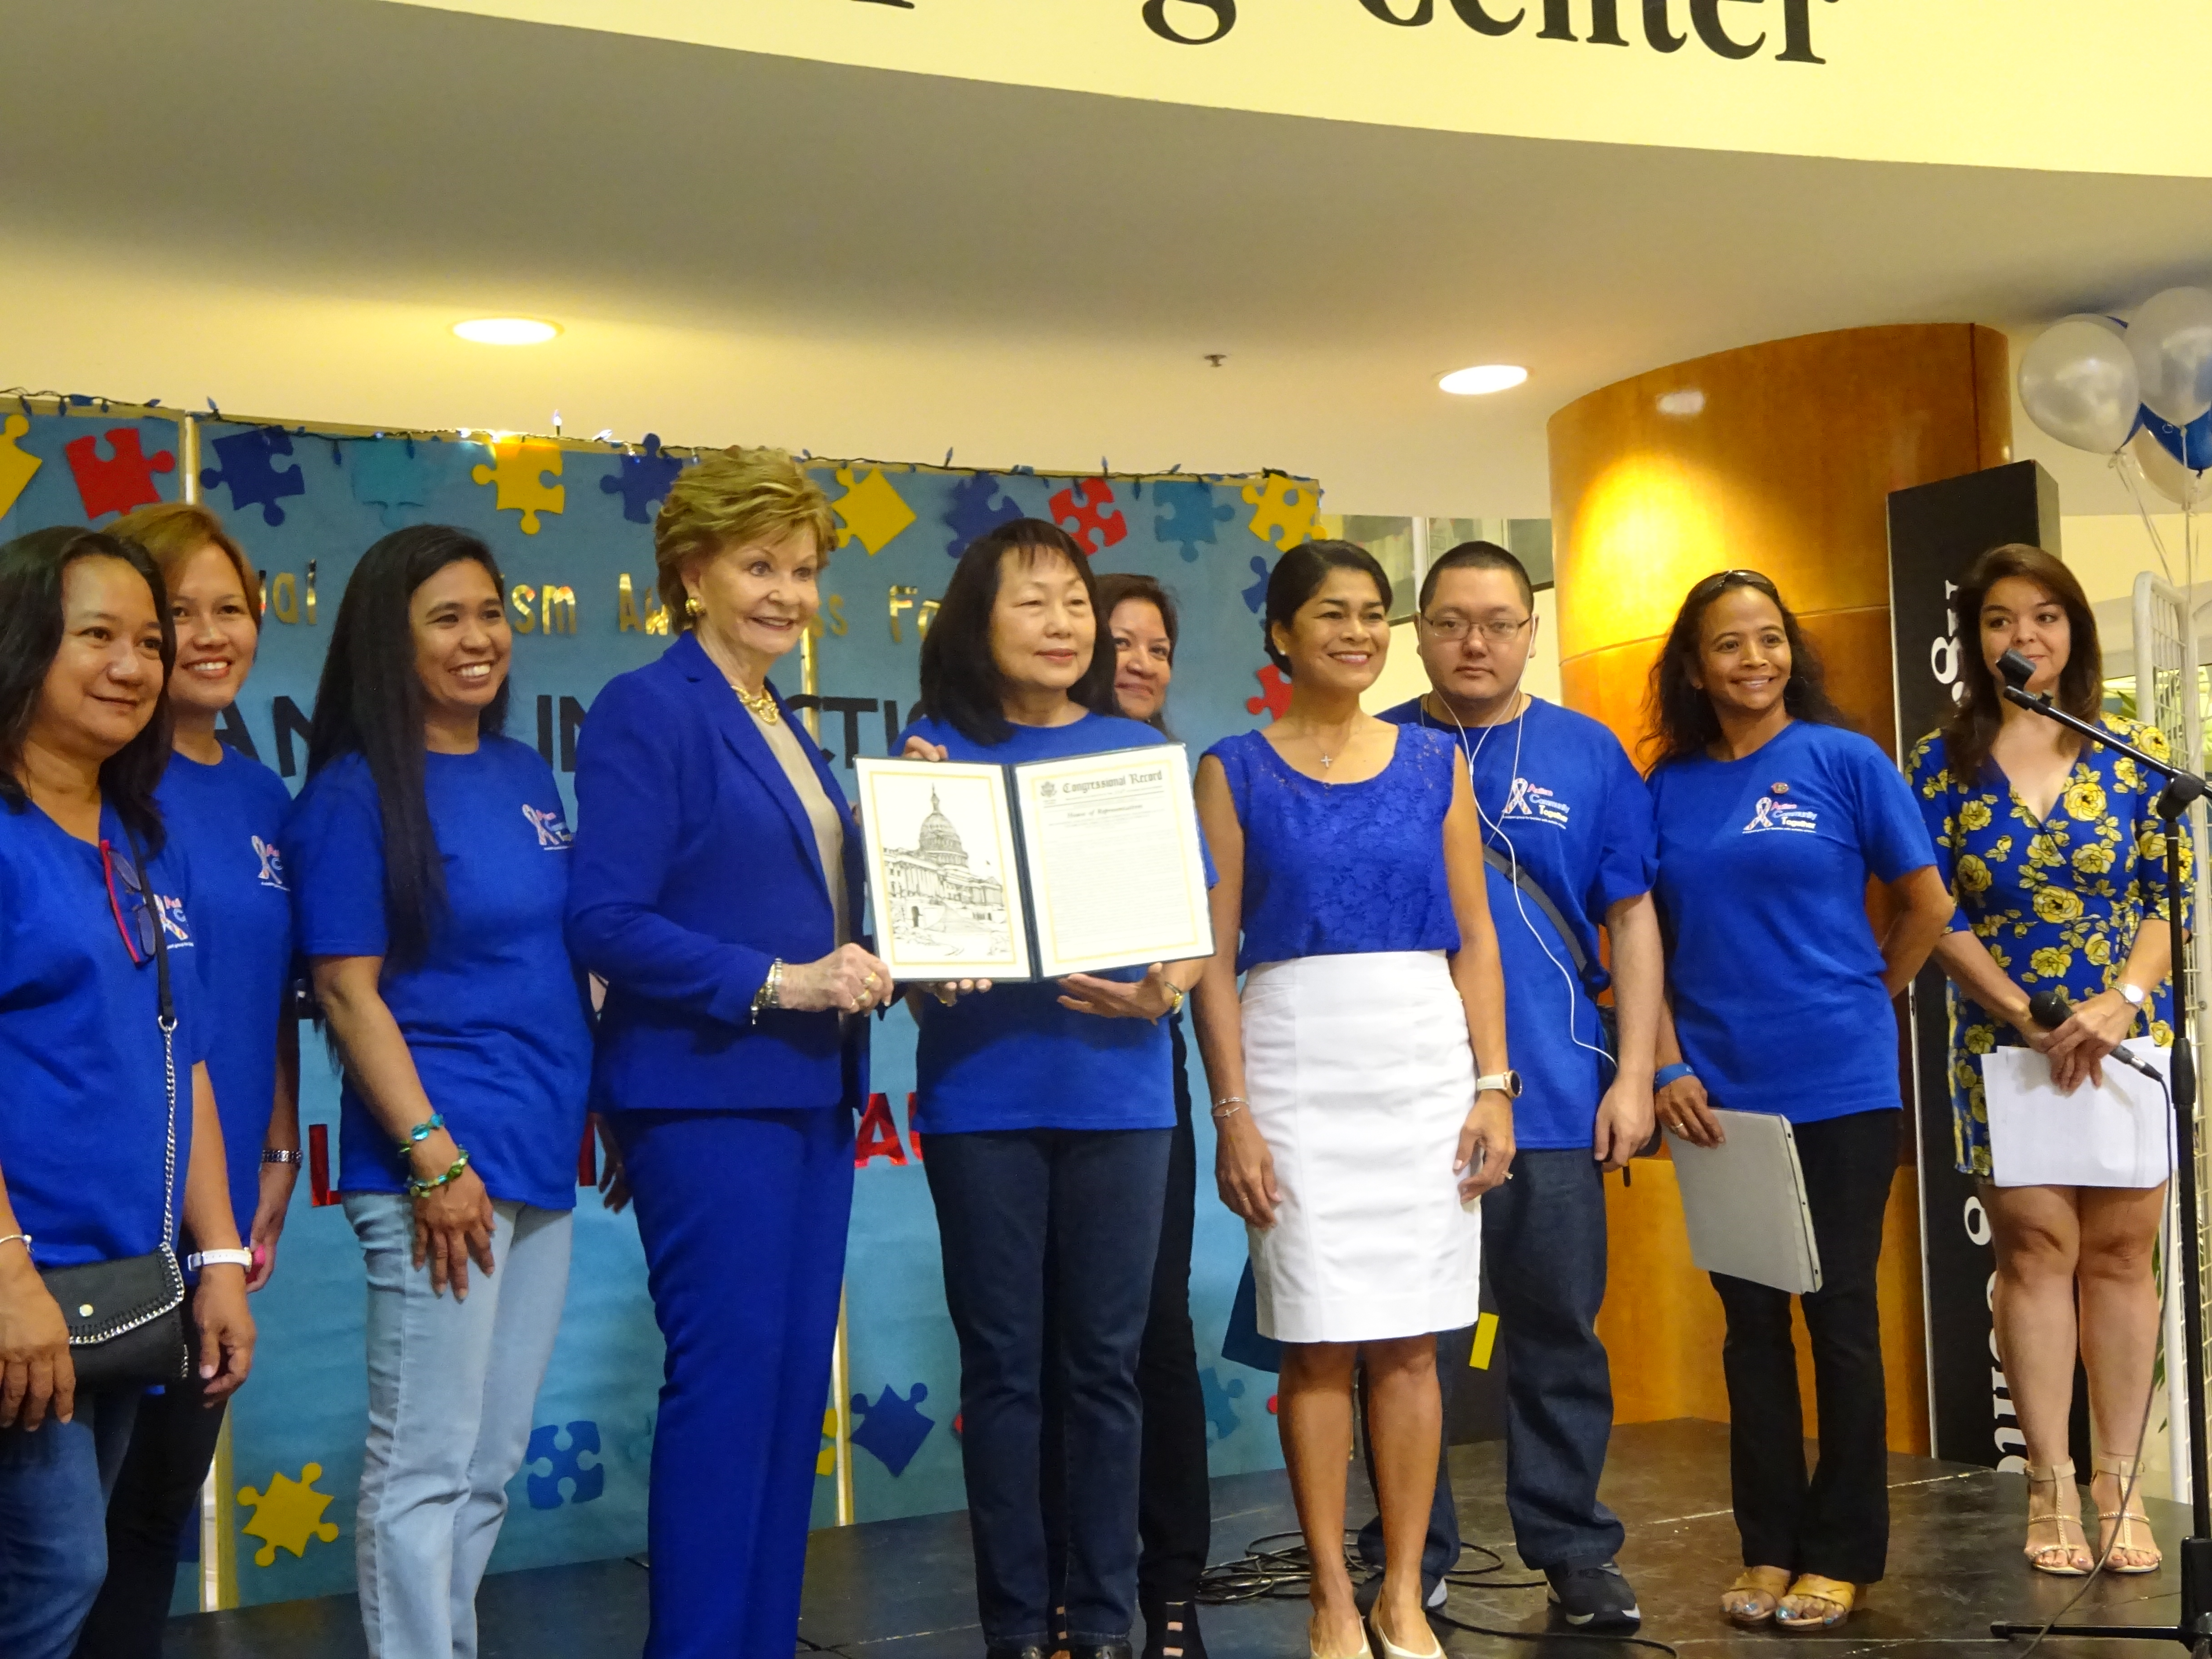 Members of the Autism Community Together (ACT) non-profit organization facilitated the opening ceremonies of the Autism Month celebration and outreach event held at the Agana Shopping Center's Center Court on Saturday, April 3.  Lou Mesa, President of ACT (holding the certificate) and the officers were joined by Congresswoman Madeliene Bordallo (to Lou's left) and First Lady Christine Calvo (to Lou's right) on stage to applaud the efforts of the community in promoting increased awareness of autism on island.